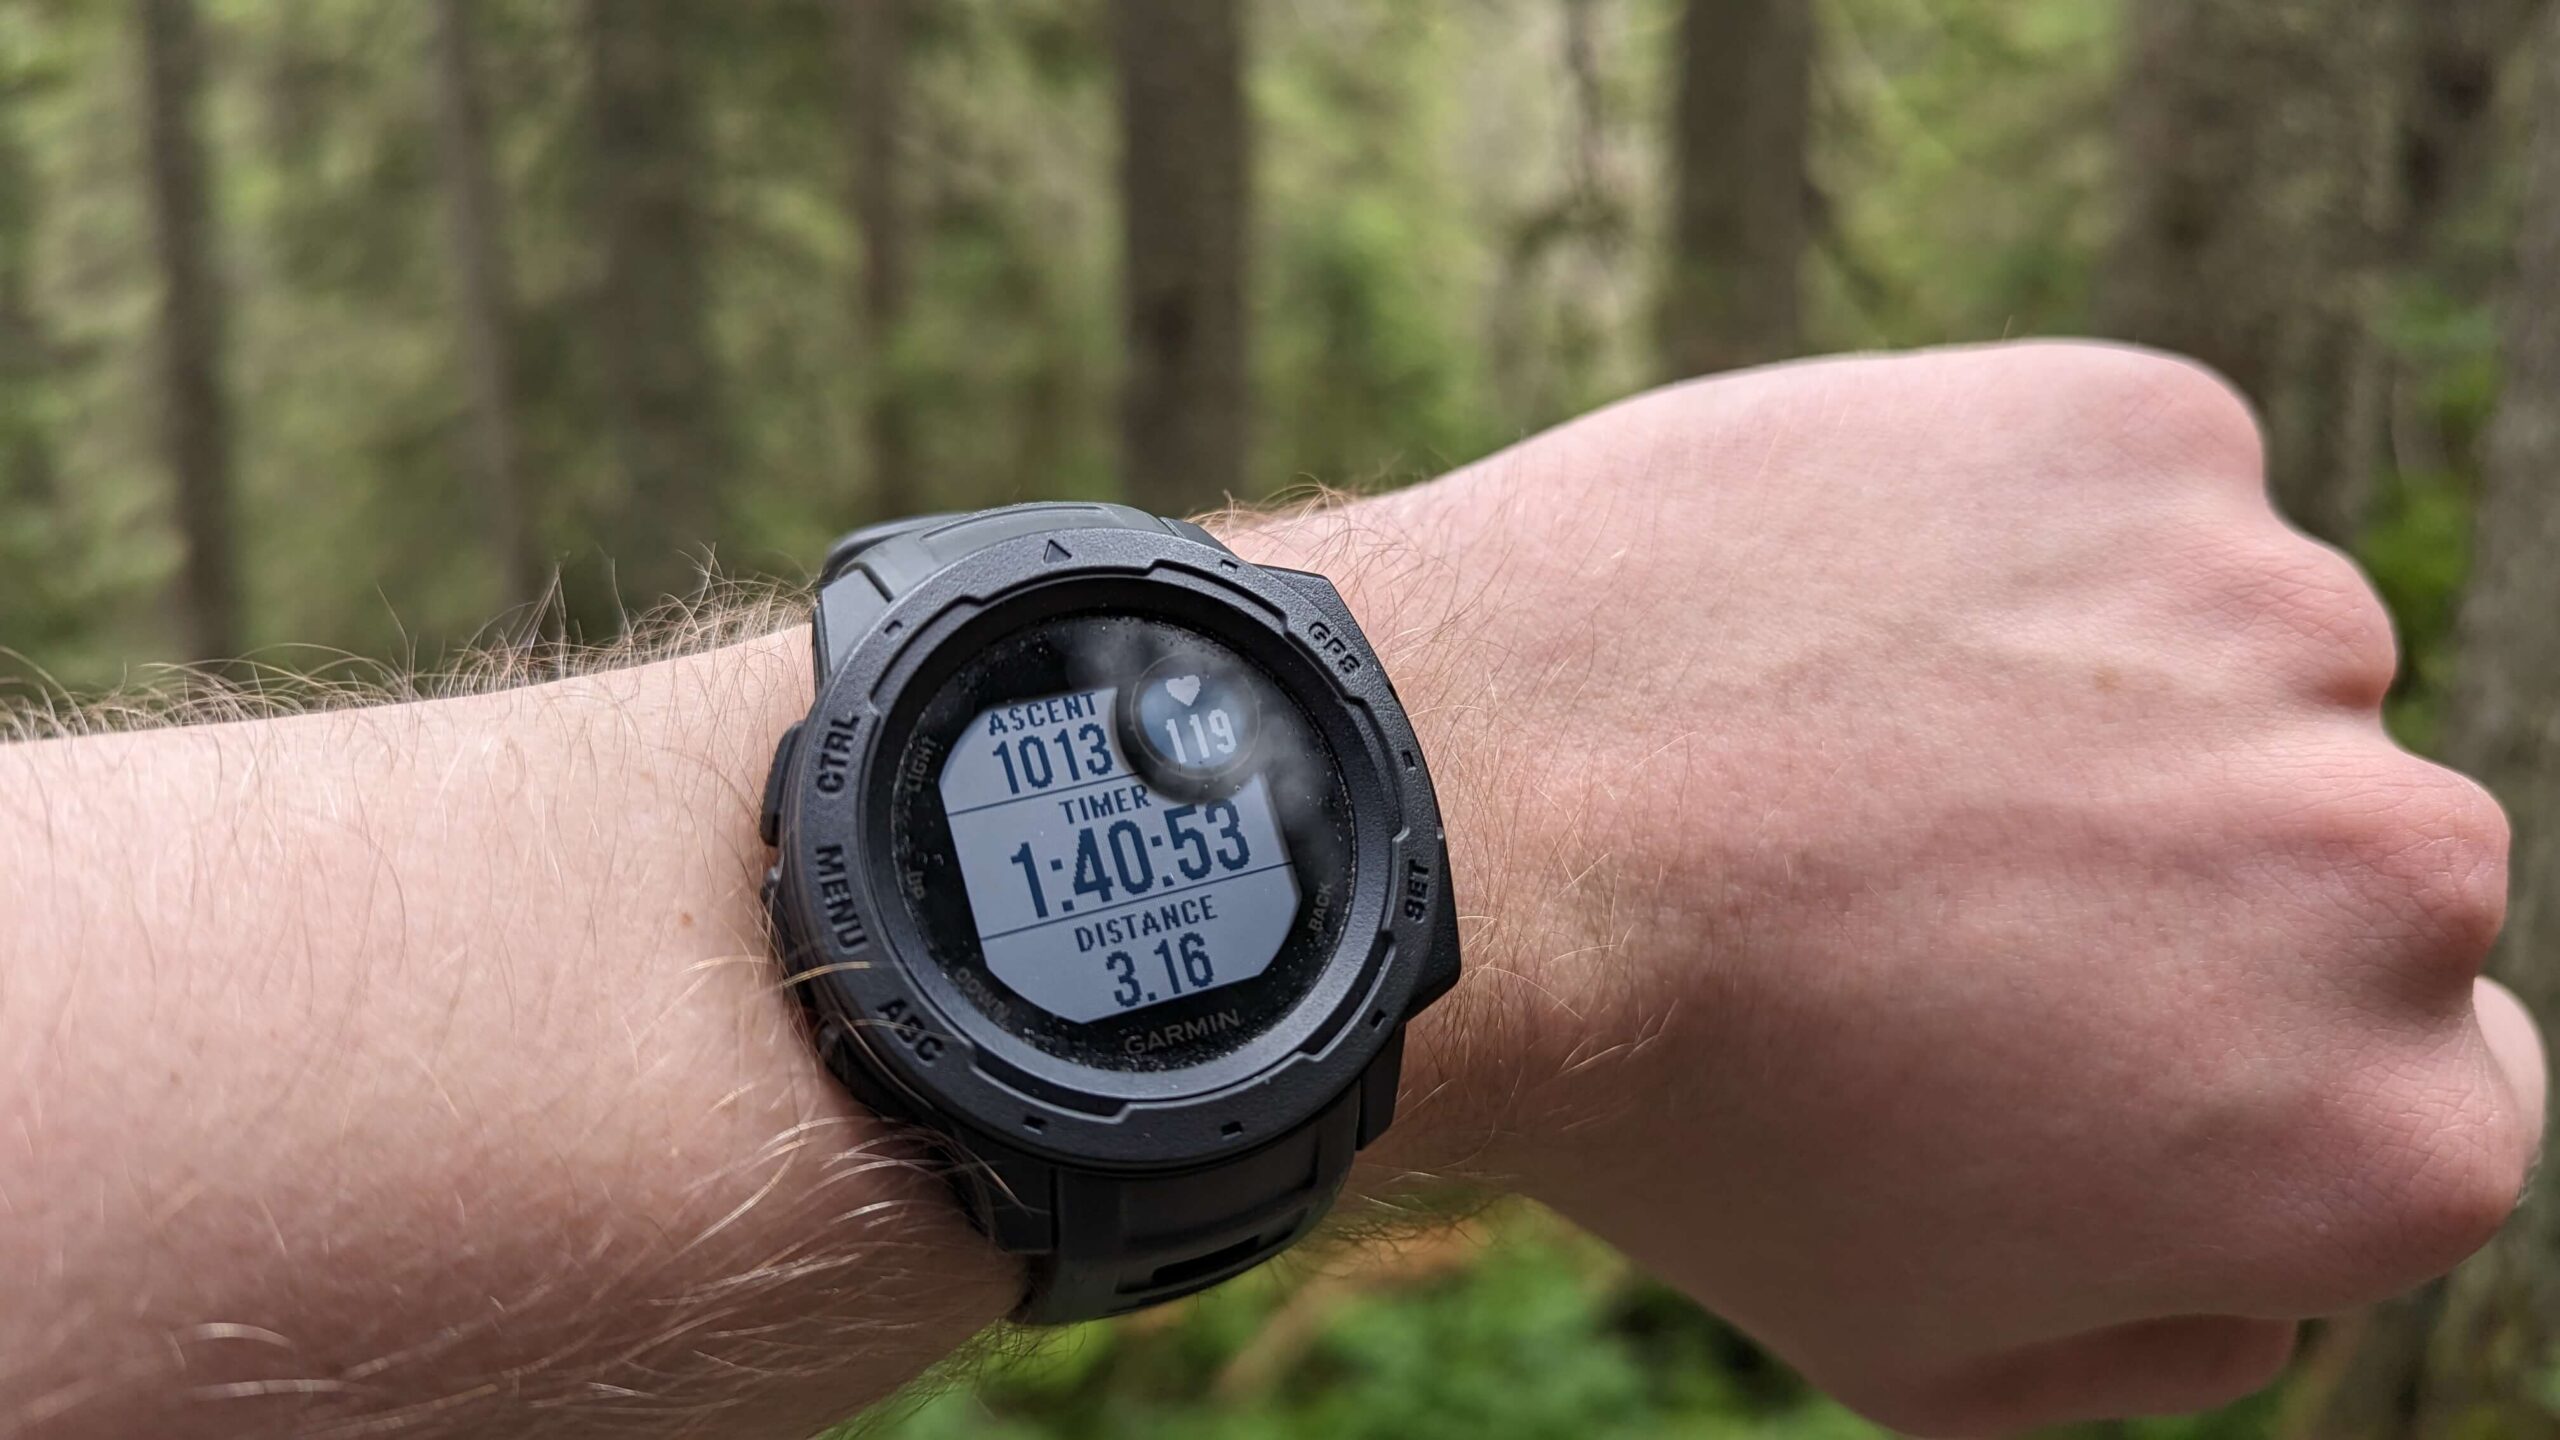 I Switched the Pixel Watch for the Garmin Instinct for a Week!